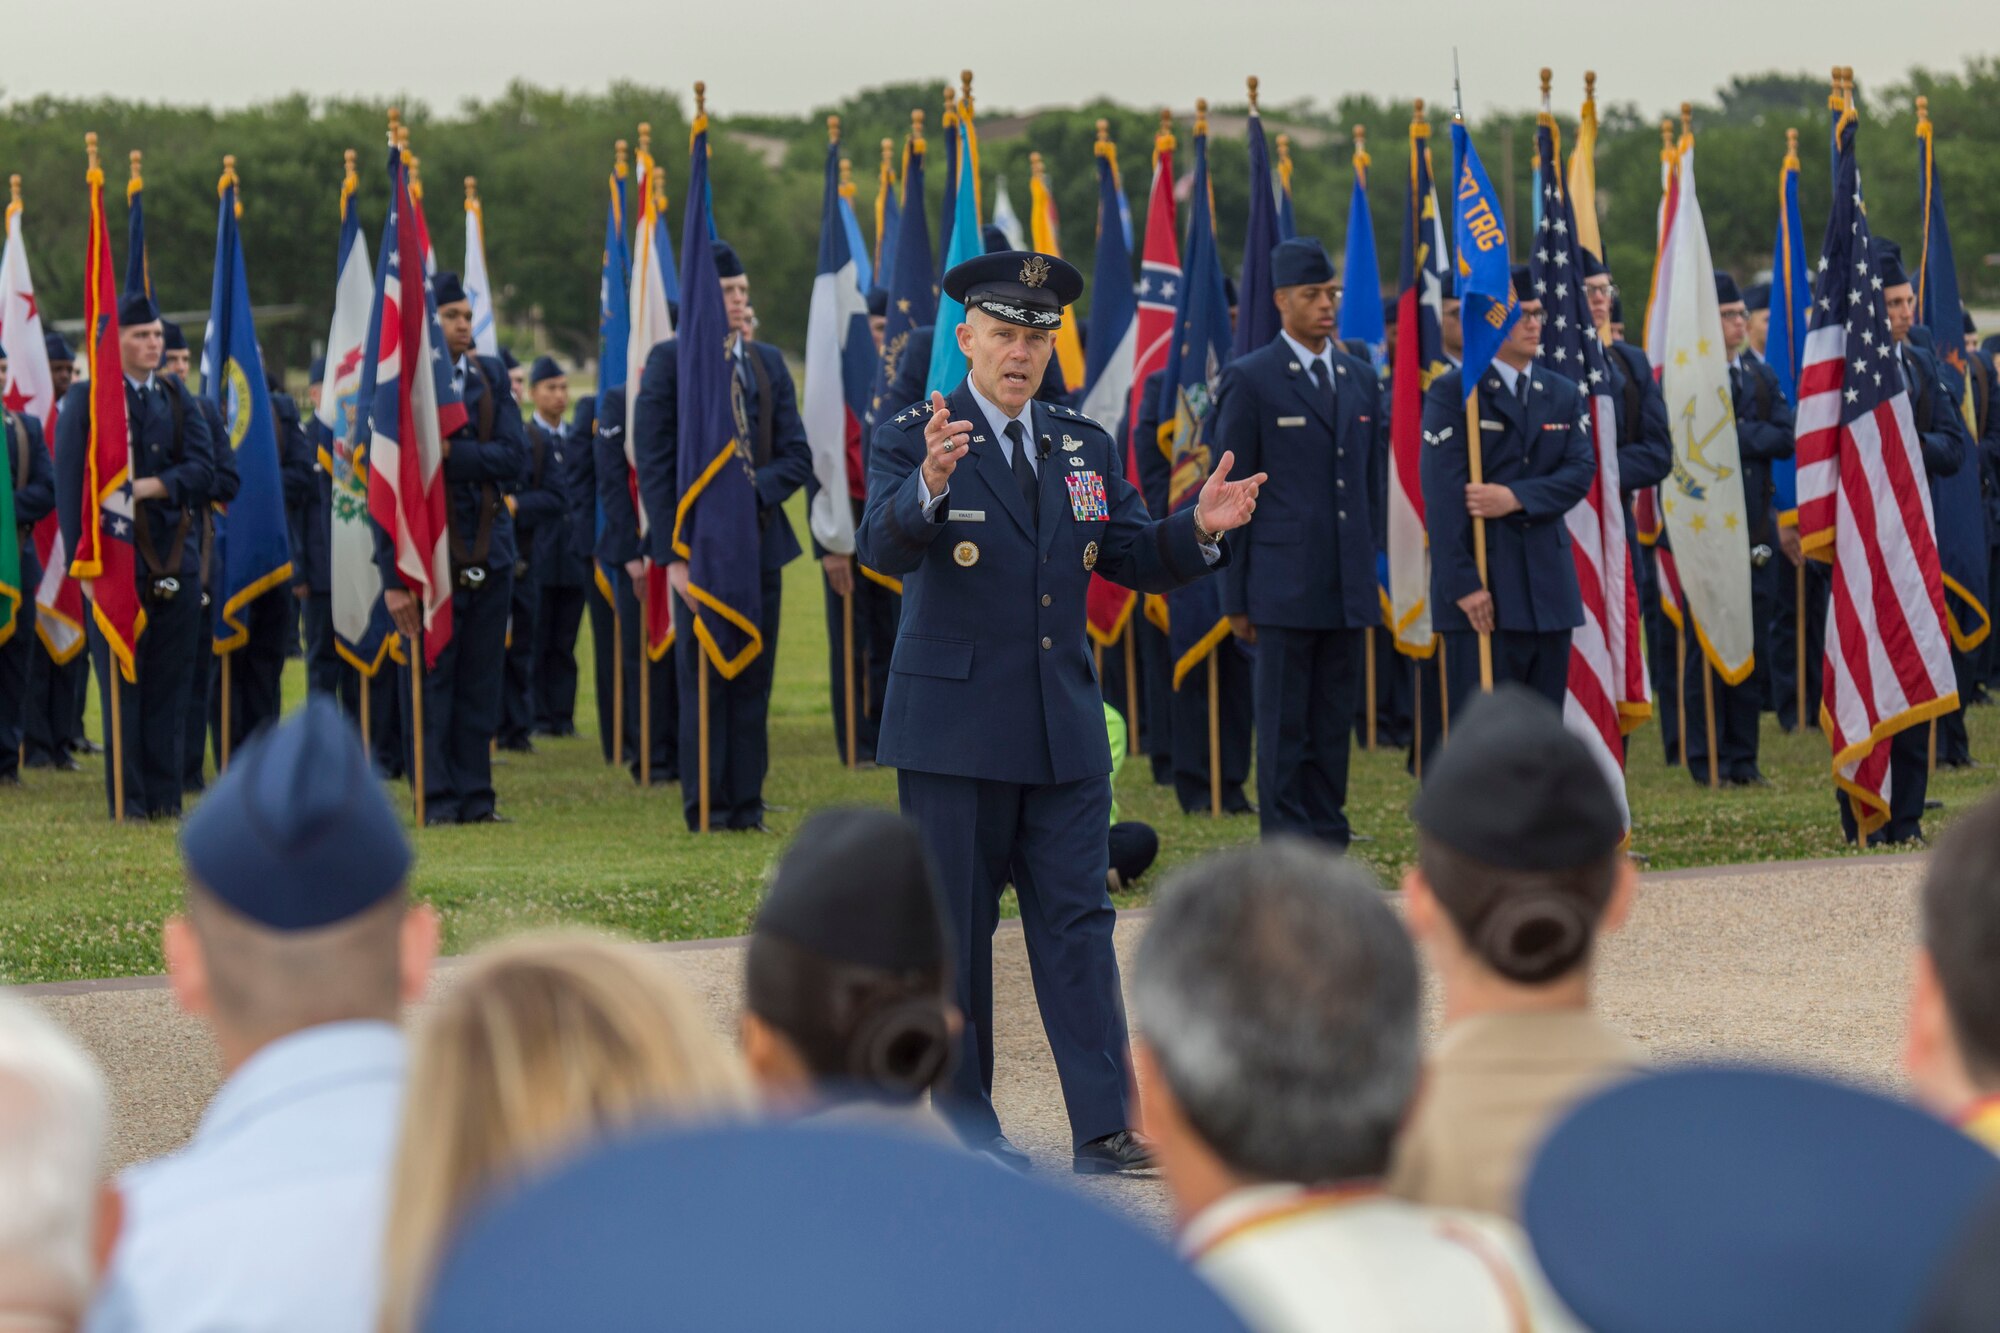 Lt. Gen. Steven L. Kwast, Commander of the Air Education and Training Command address the crowd at Joint Base San Antonio-Lackland, Texas during a basic military training graduation ceremony April 20, 2018. The ceremony also acknowledged the beginning of “Fiesta San Antonio,” the city’s annual festival held to honor the memory of the battles of the Alamo and San Jacinto. (U.S. Air Force photo by Ismael Ortega / Released)